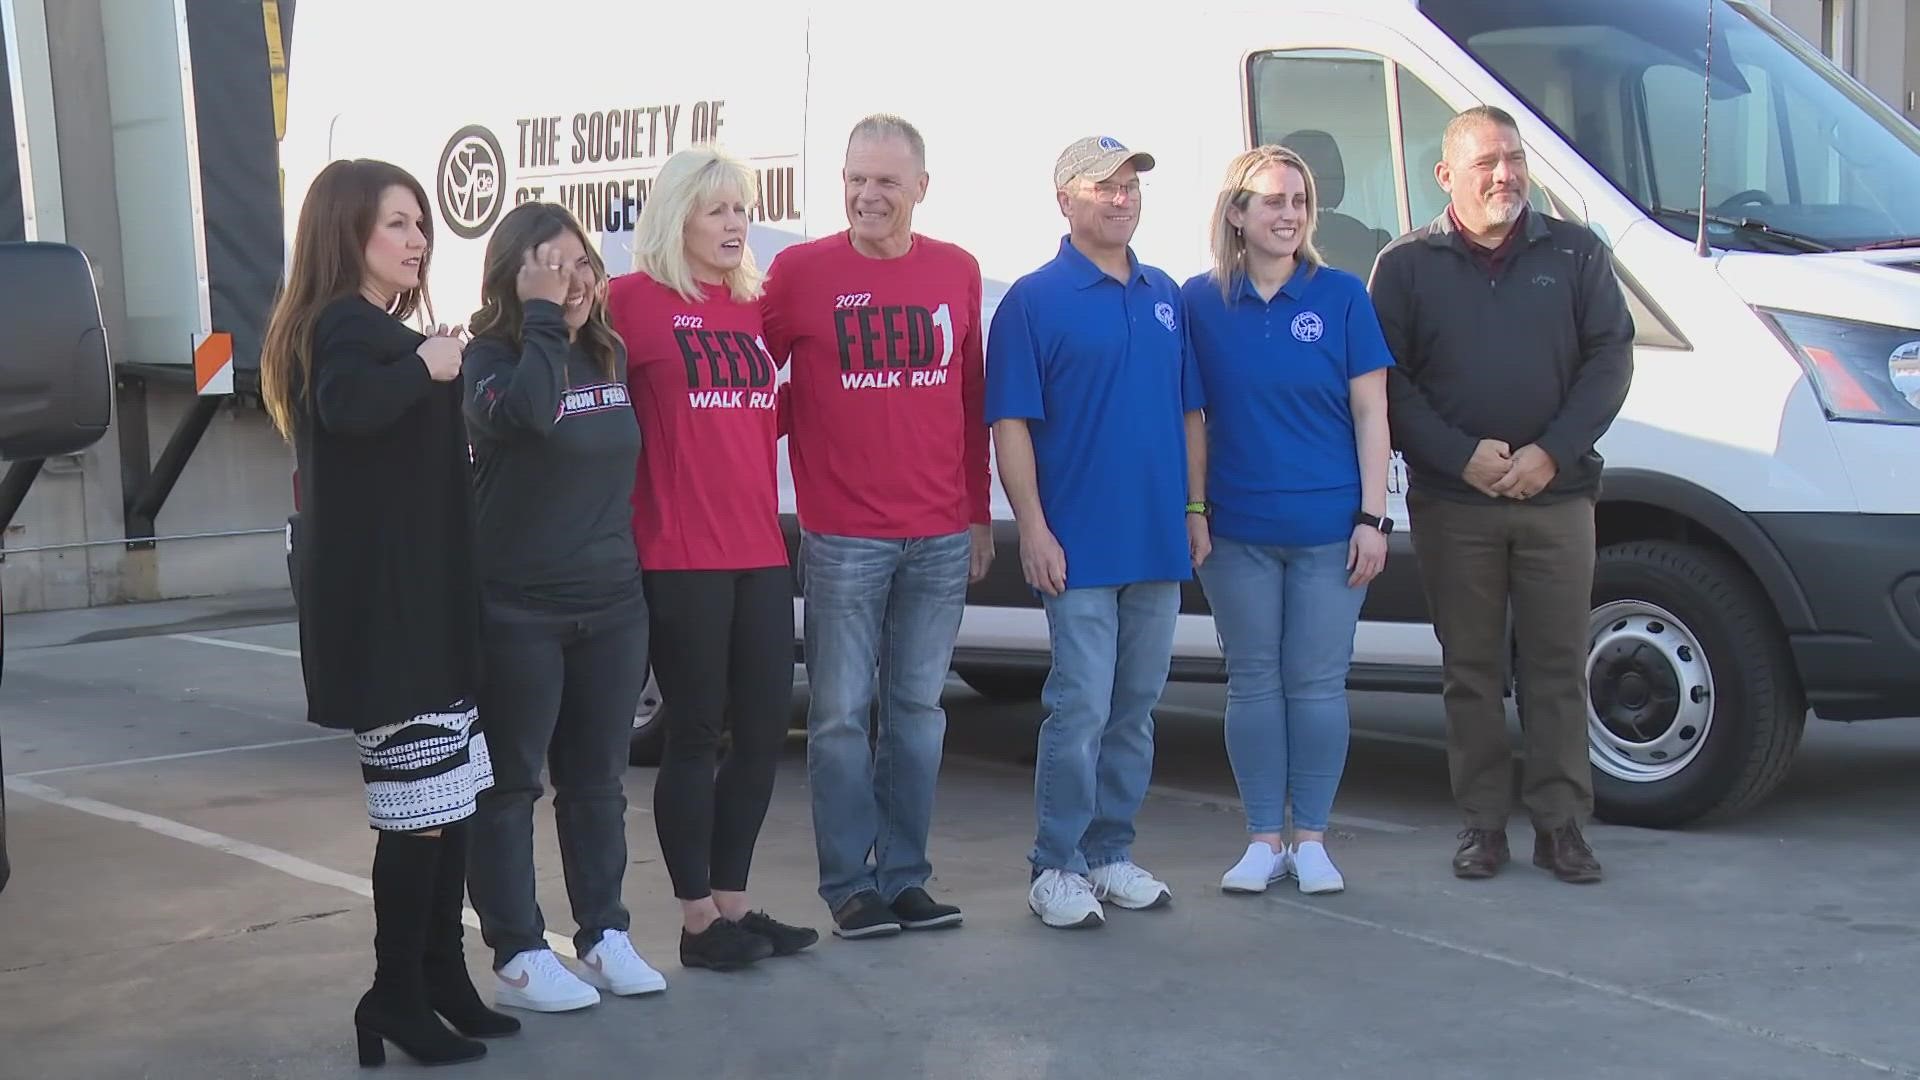 The vans were purchased through a $1 million grant from the Department of Housing and Urban Development.